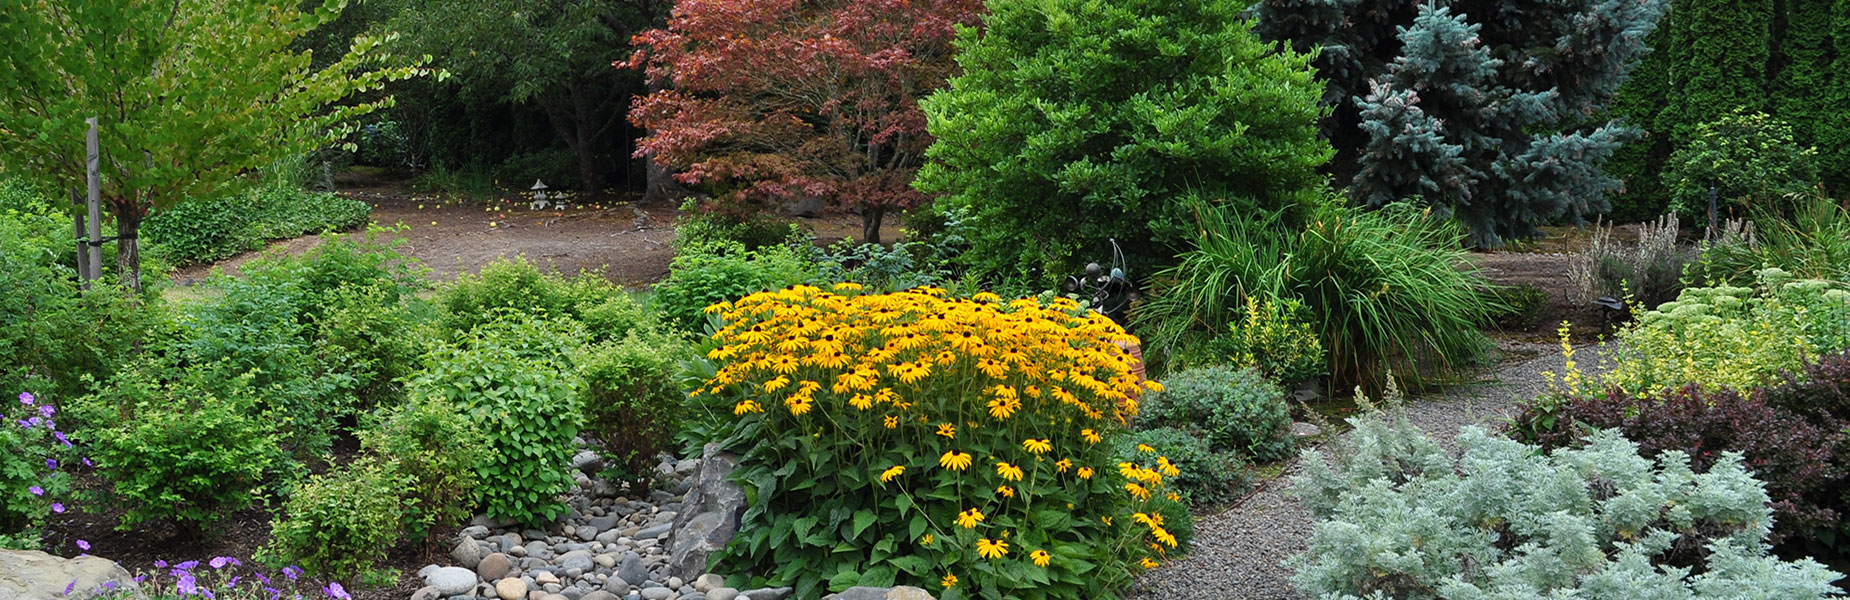 Contact Brenda Alexander, Cohesion Land Design in Kelowna, BC, offers professional landscape design services.